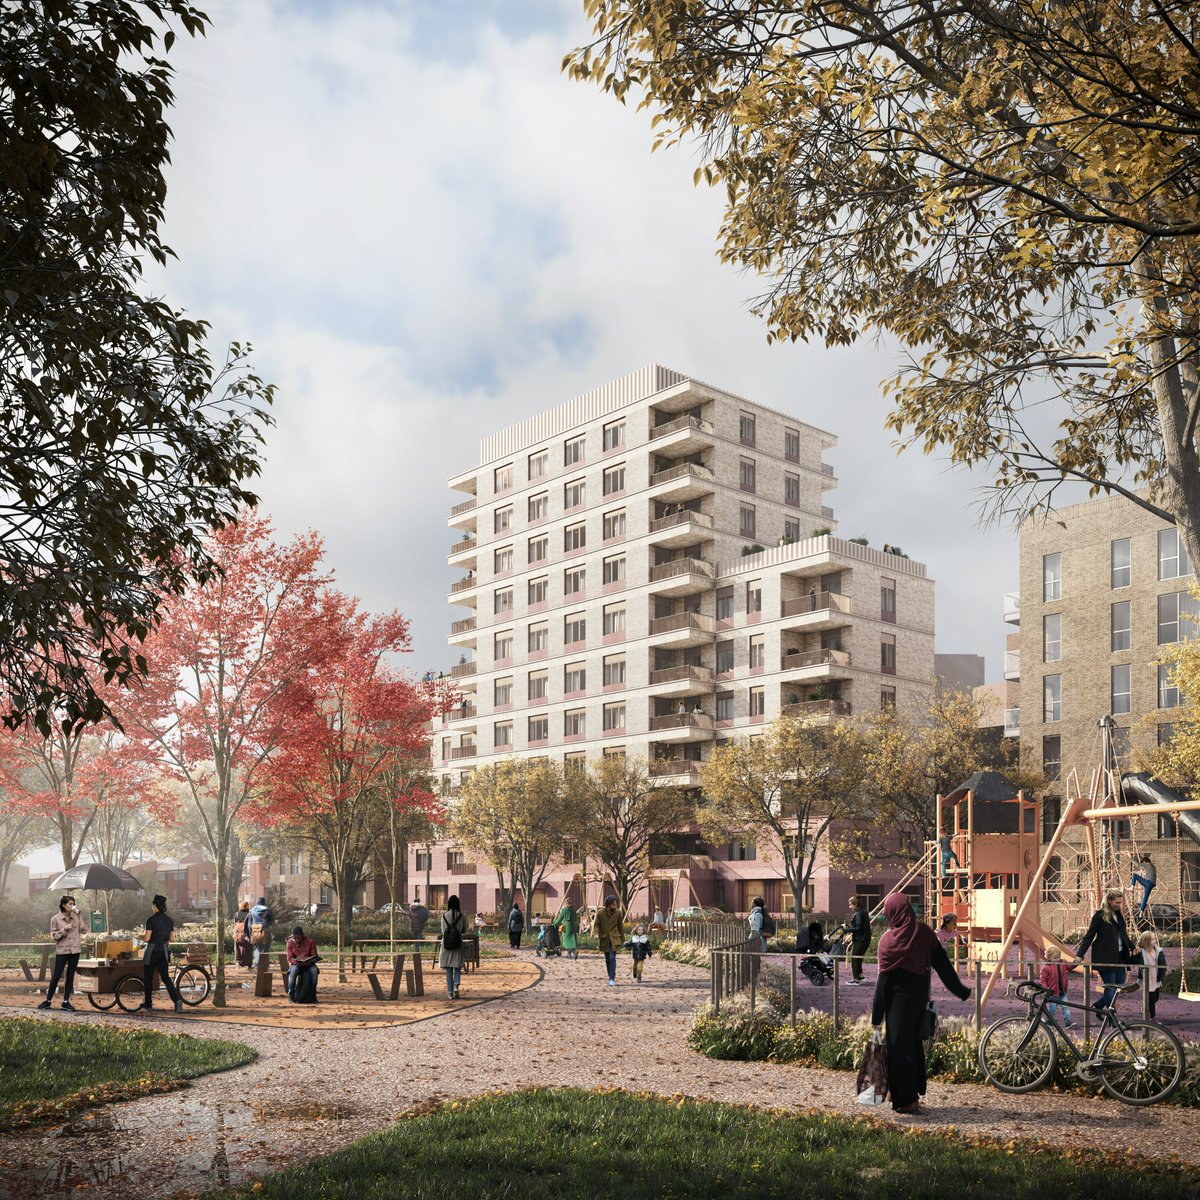 We're incredibly proud of this scheme which will deliver a further 1,600 homes to this area and pleased to be collaborating with @moco_arch @ZCD_Architects and @LDADesign, for our fantastic client Aberfeldy New Village LLP (@EcoWorldLondon and @PoplarHARCA).